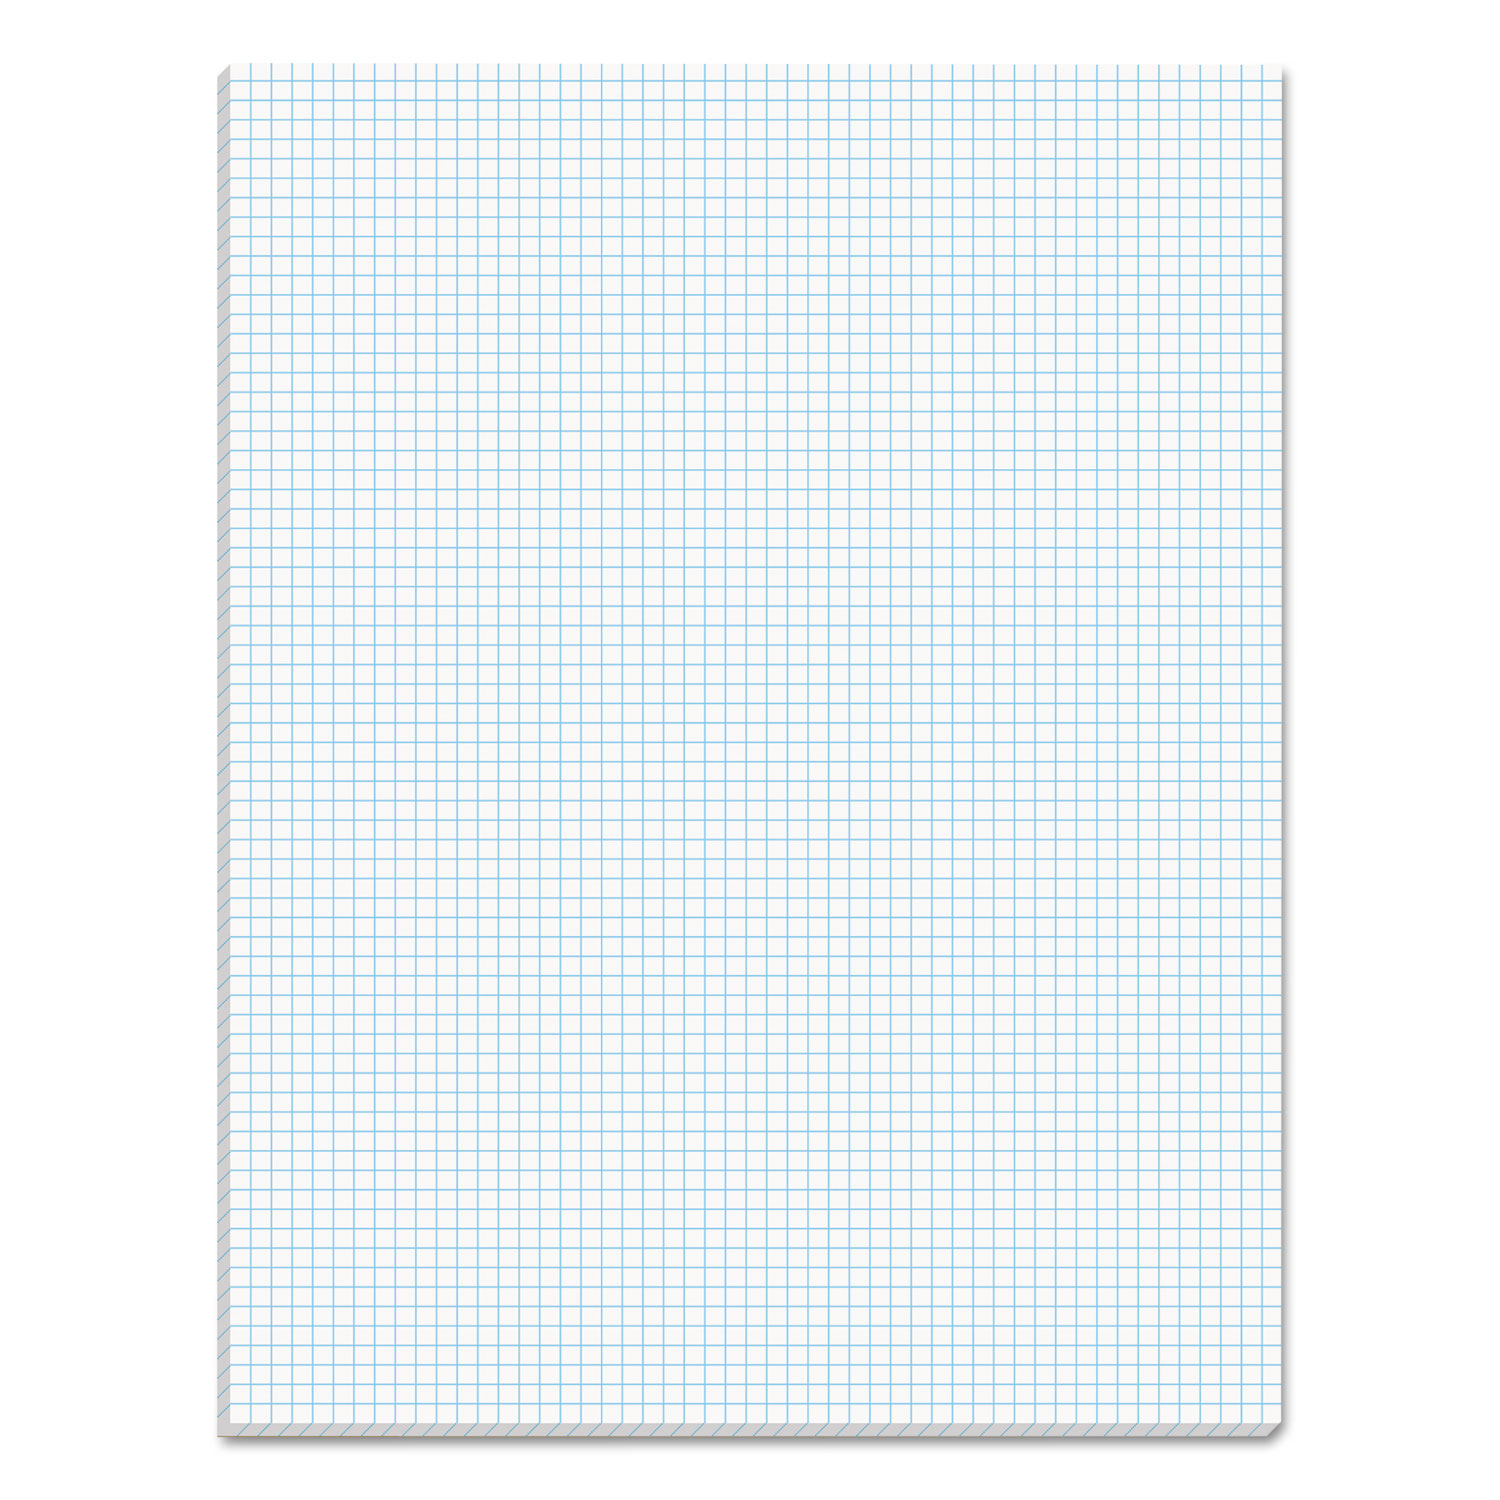  TOPS 33061 Quadrille Pads, 6 sq/in Quadrille Rule, 8.5 x 11, White, 50 Sheets (TOP33061) 